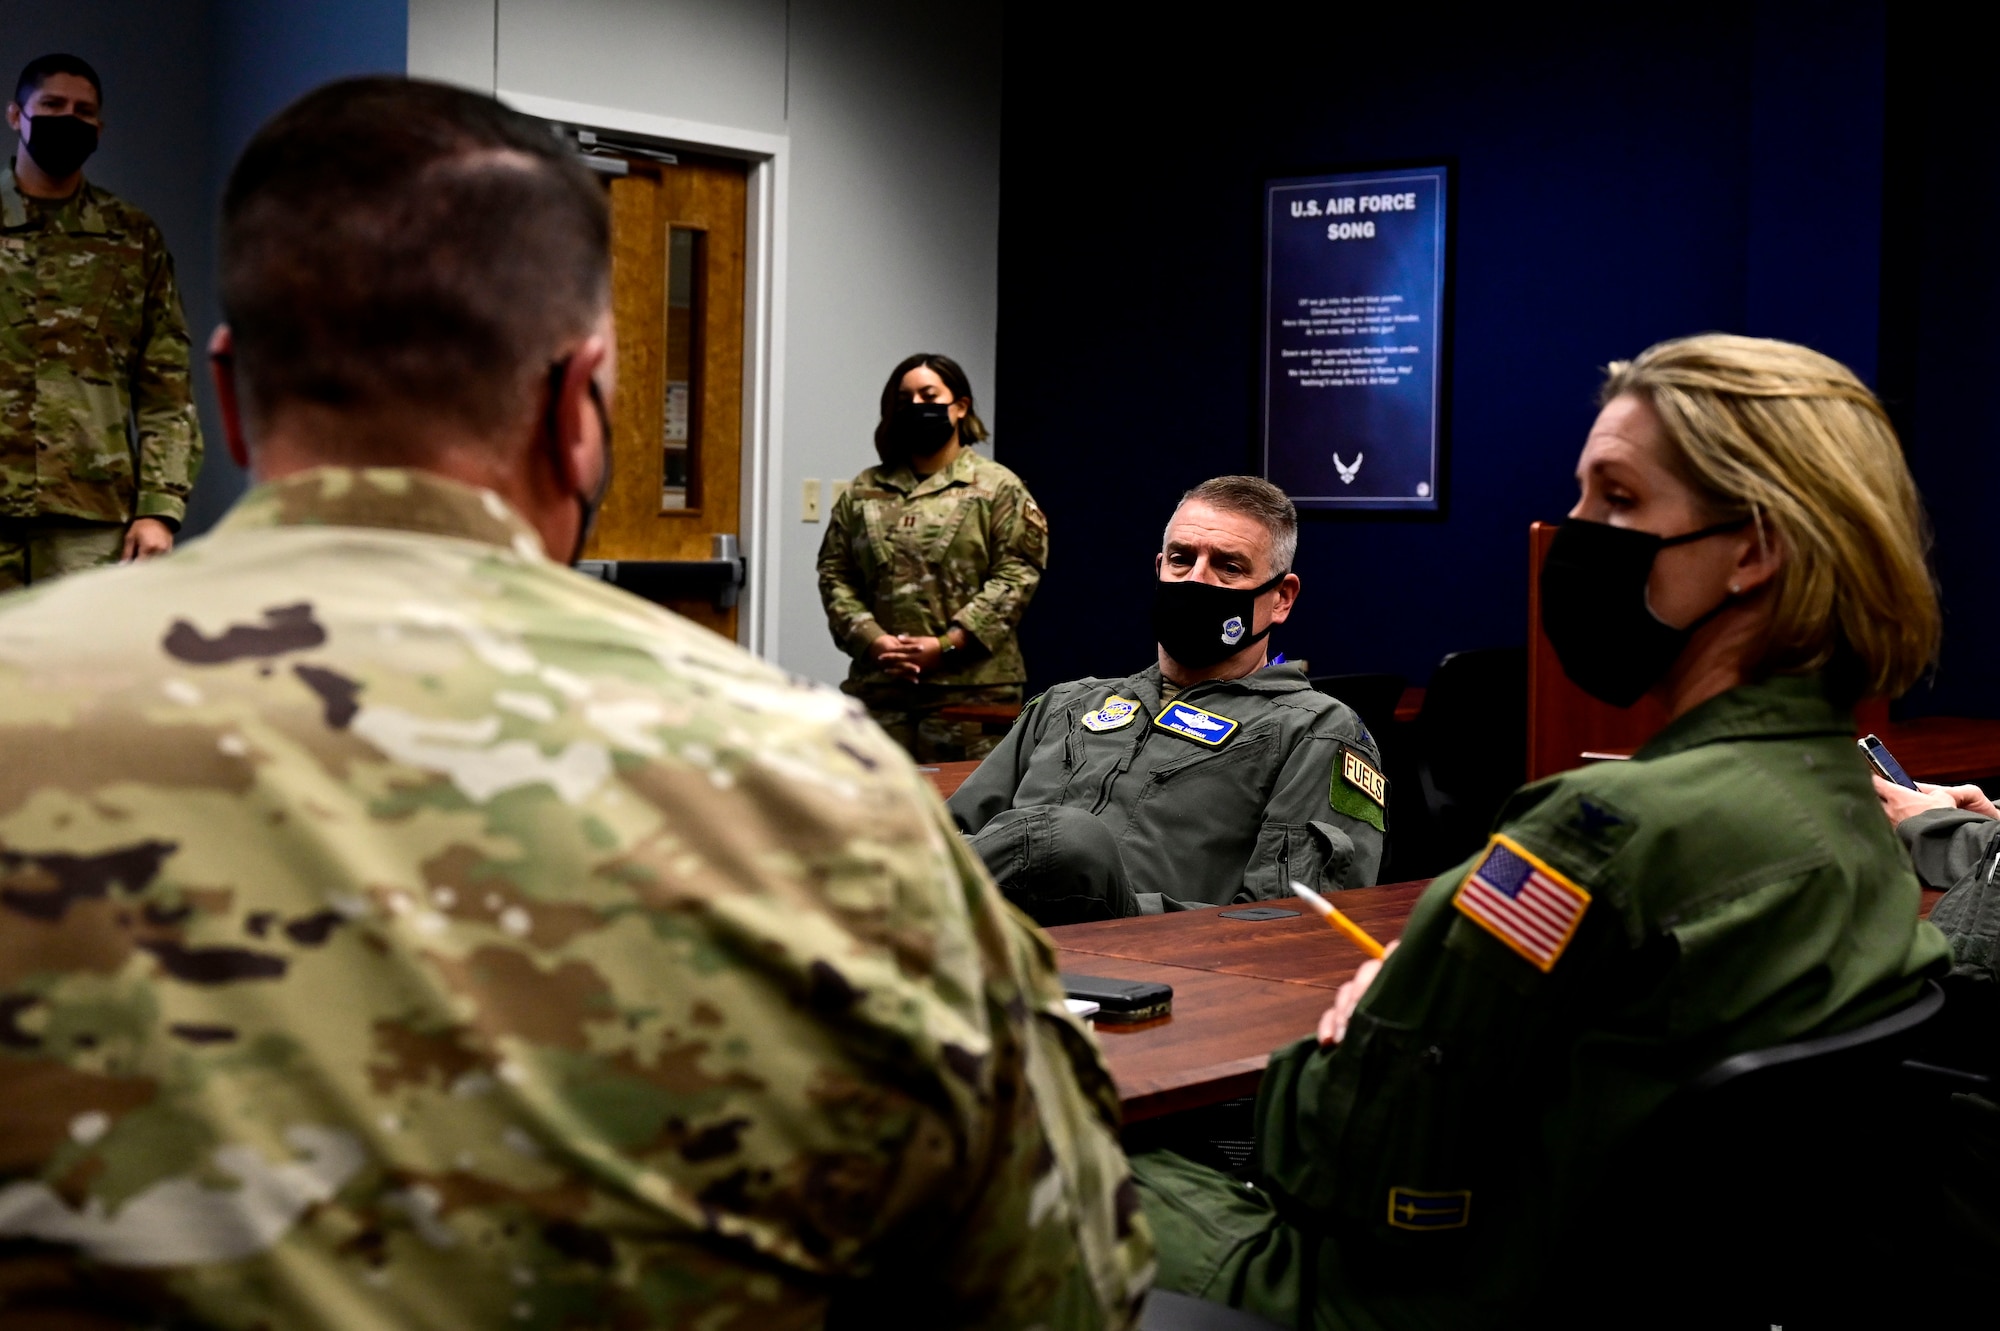 The 19th Airlift Wing command team speak with the AMC commander.